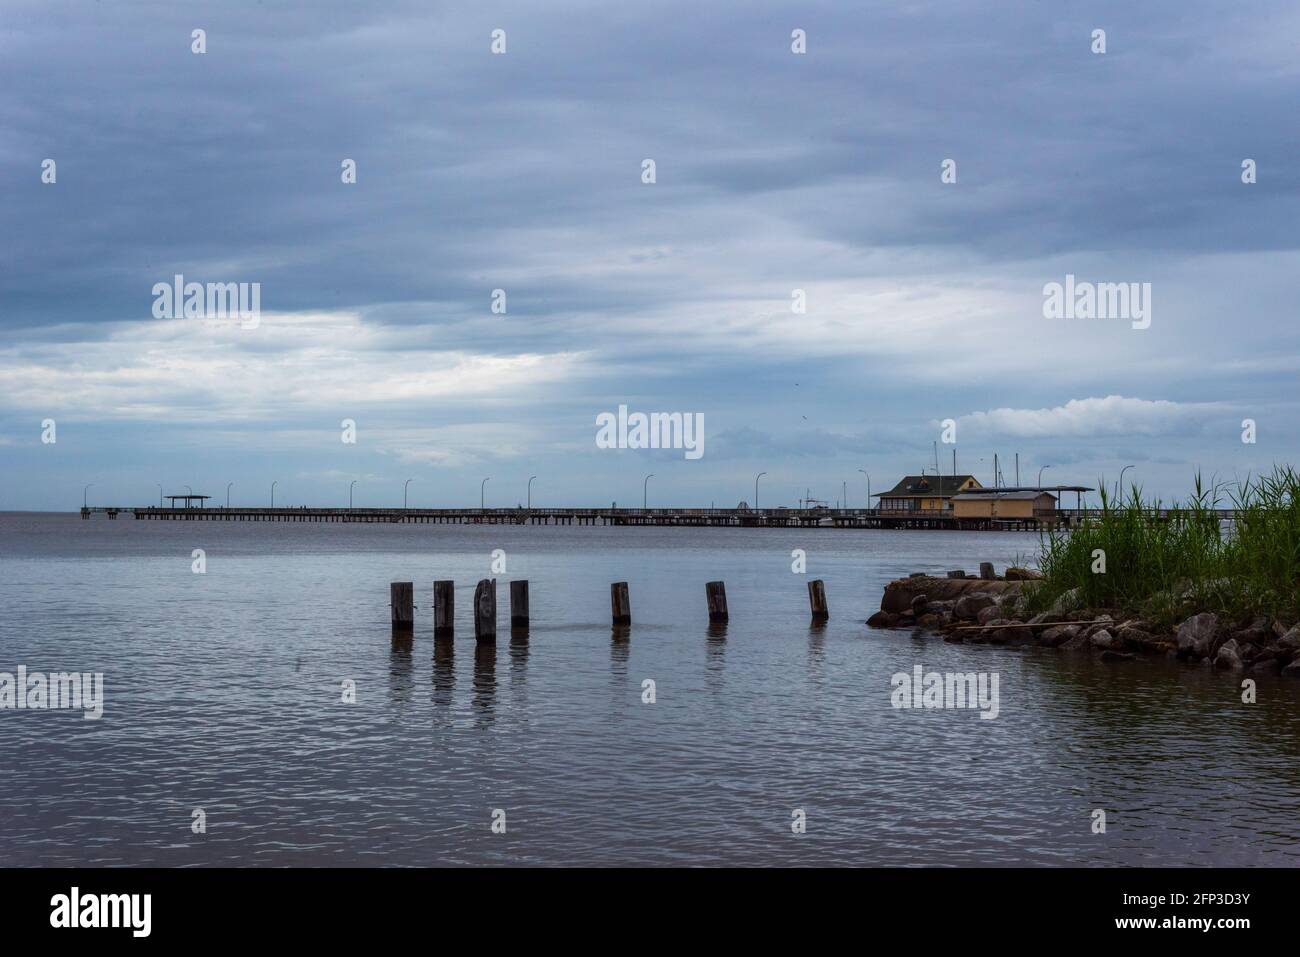 The Fairhope Municipal Pier stretches into Mobile Bay in Fairhope, Alabama, on May 19, 2021. Stock Photo